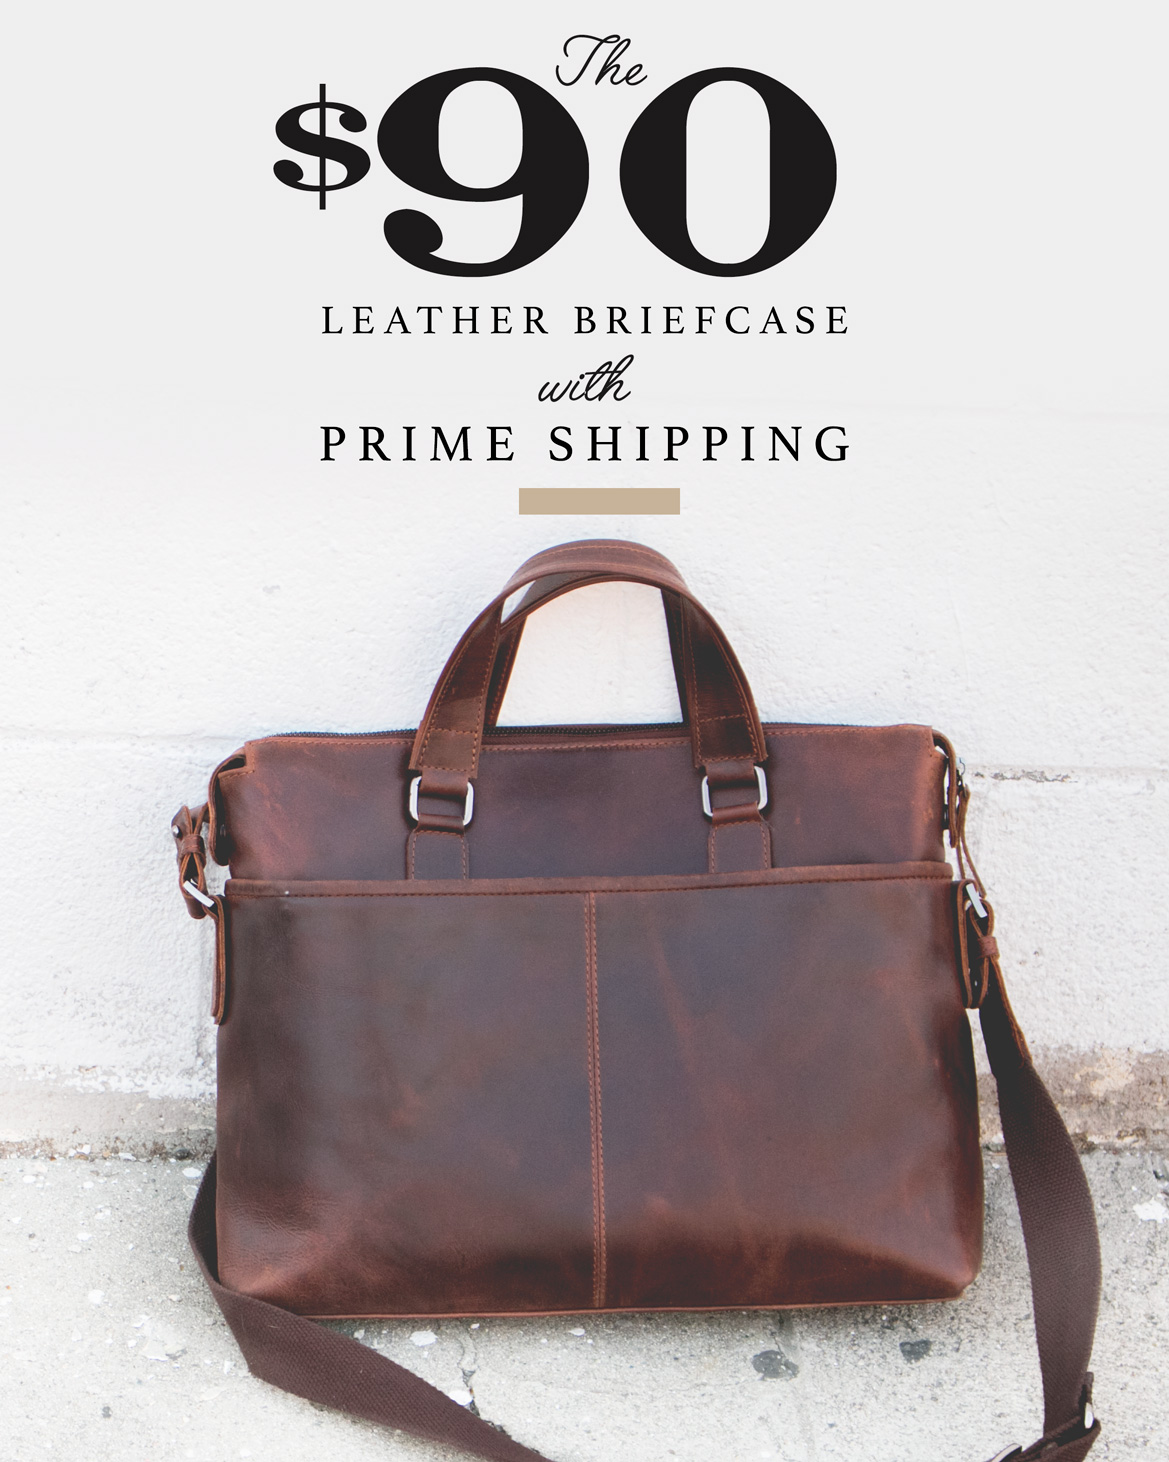 Affordable leather briefcase